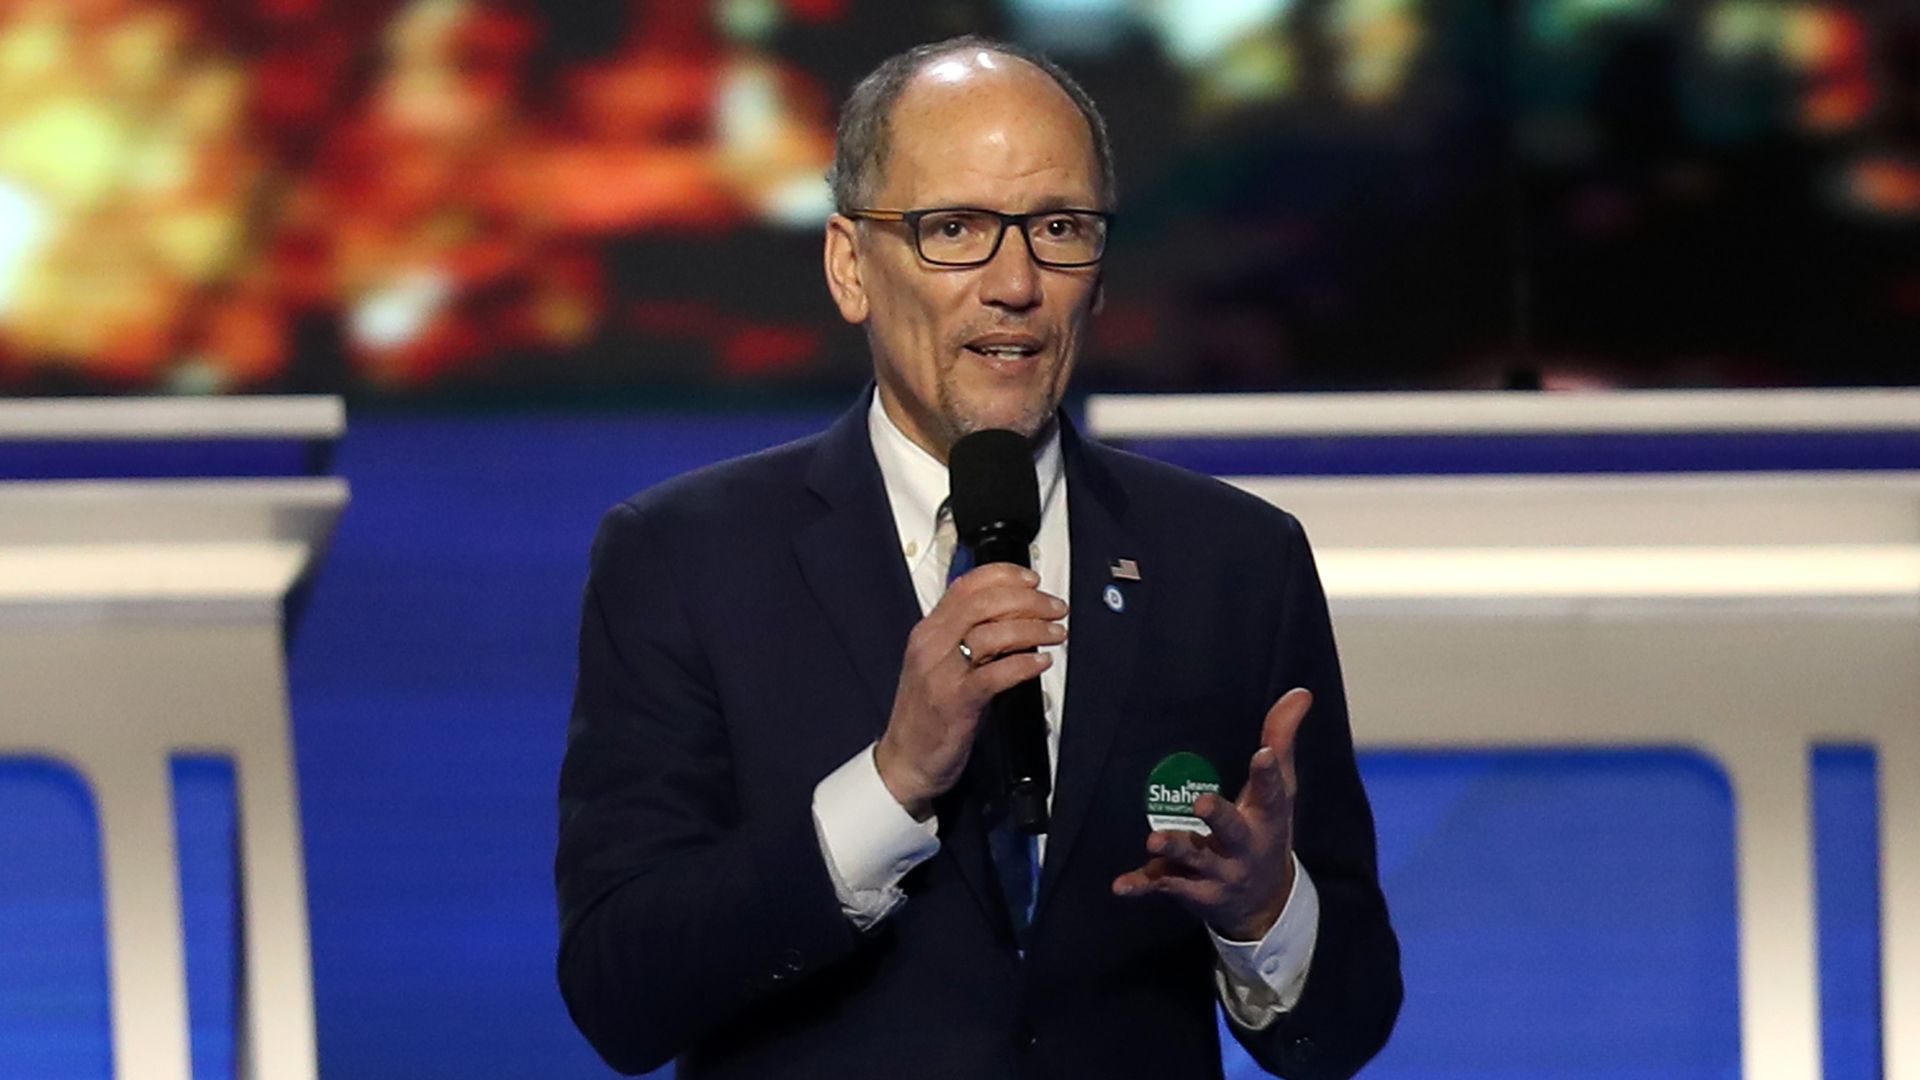 Chair of the Democratic National Committee Tom Perez speaks prior to the Democratic presidential primary debate.